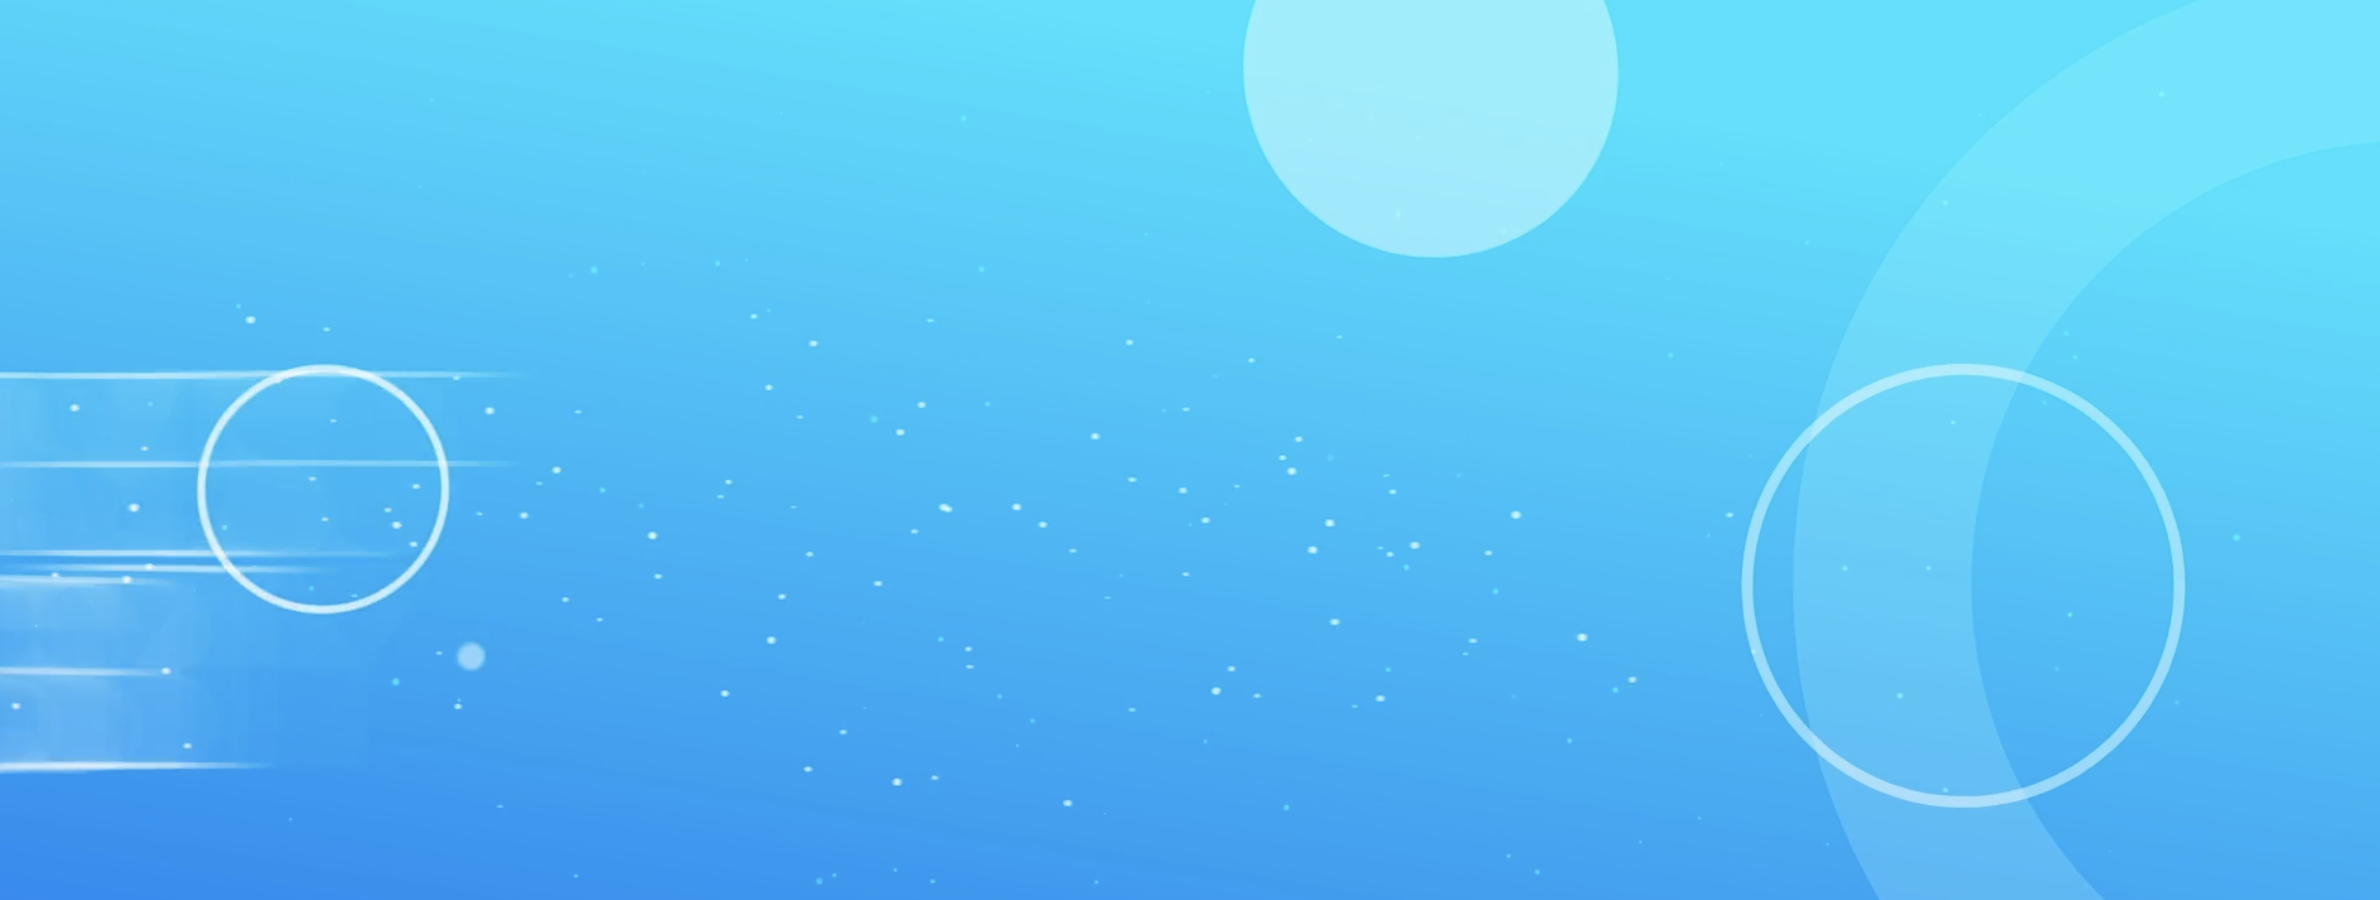 blue background with white circles